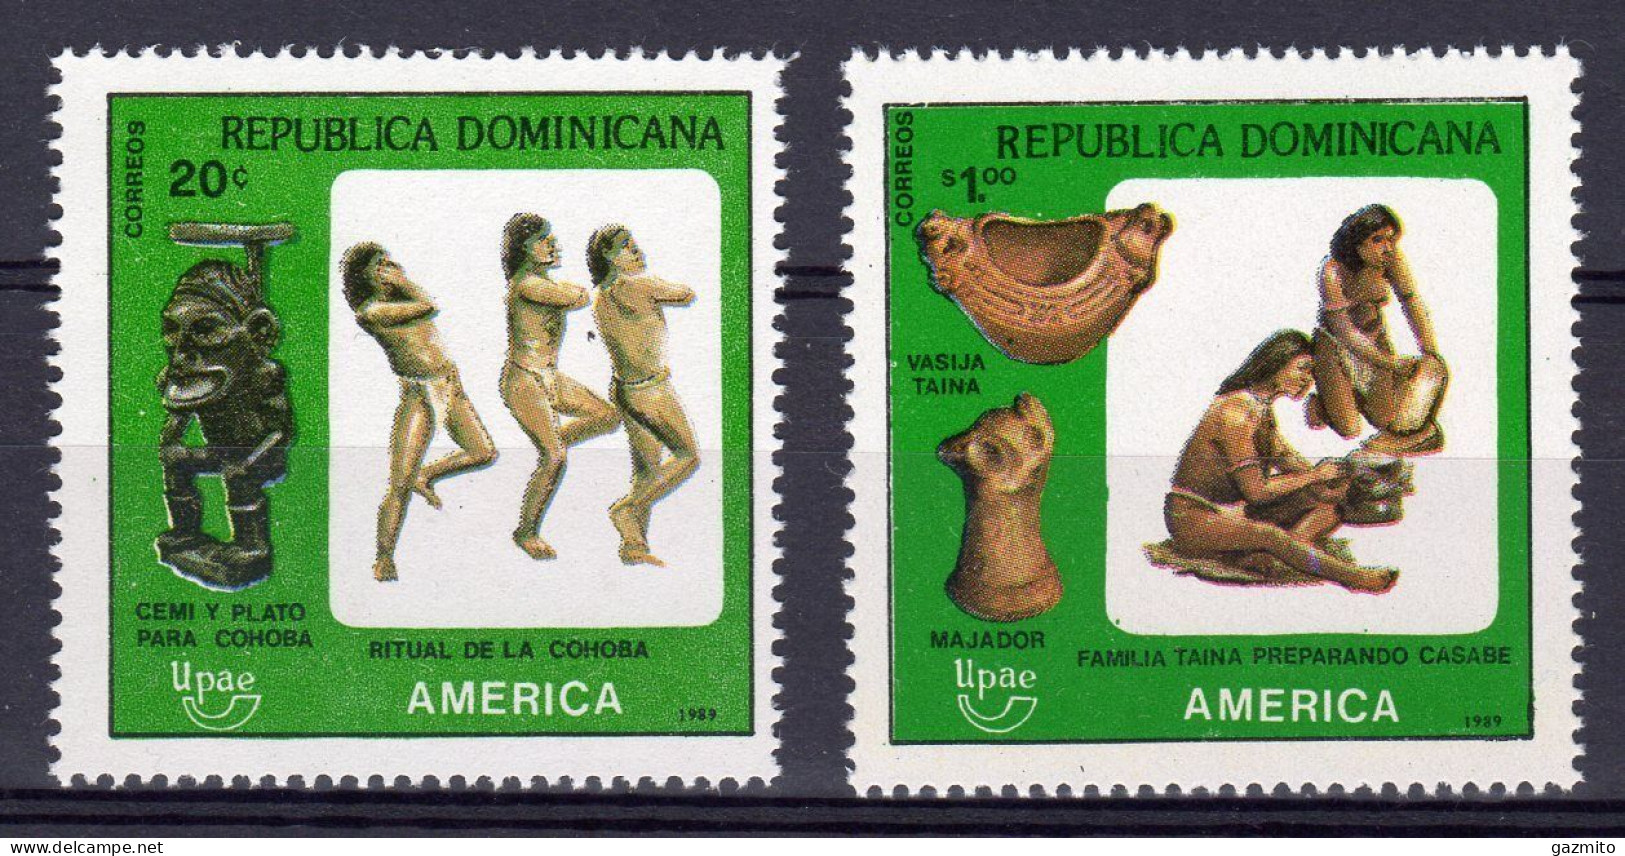 Dominicana 1989, UPAEP, Pre Colombian Artfacts, 2val - Indianen